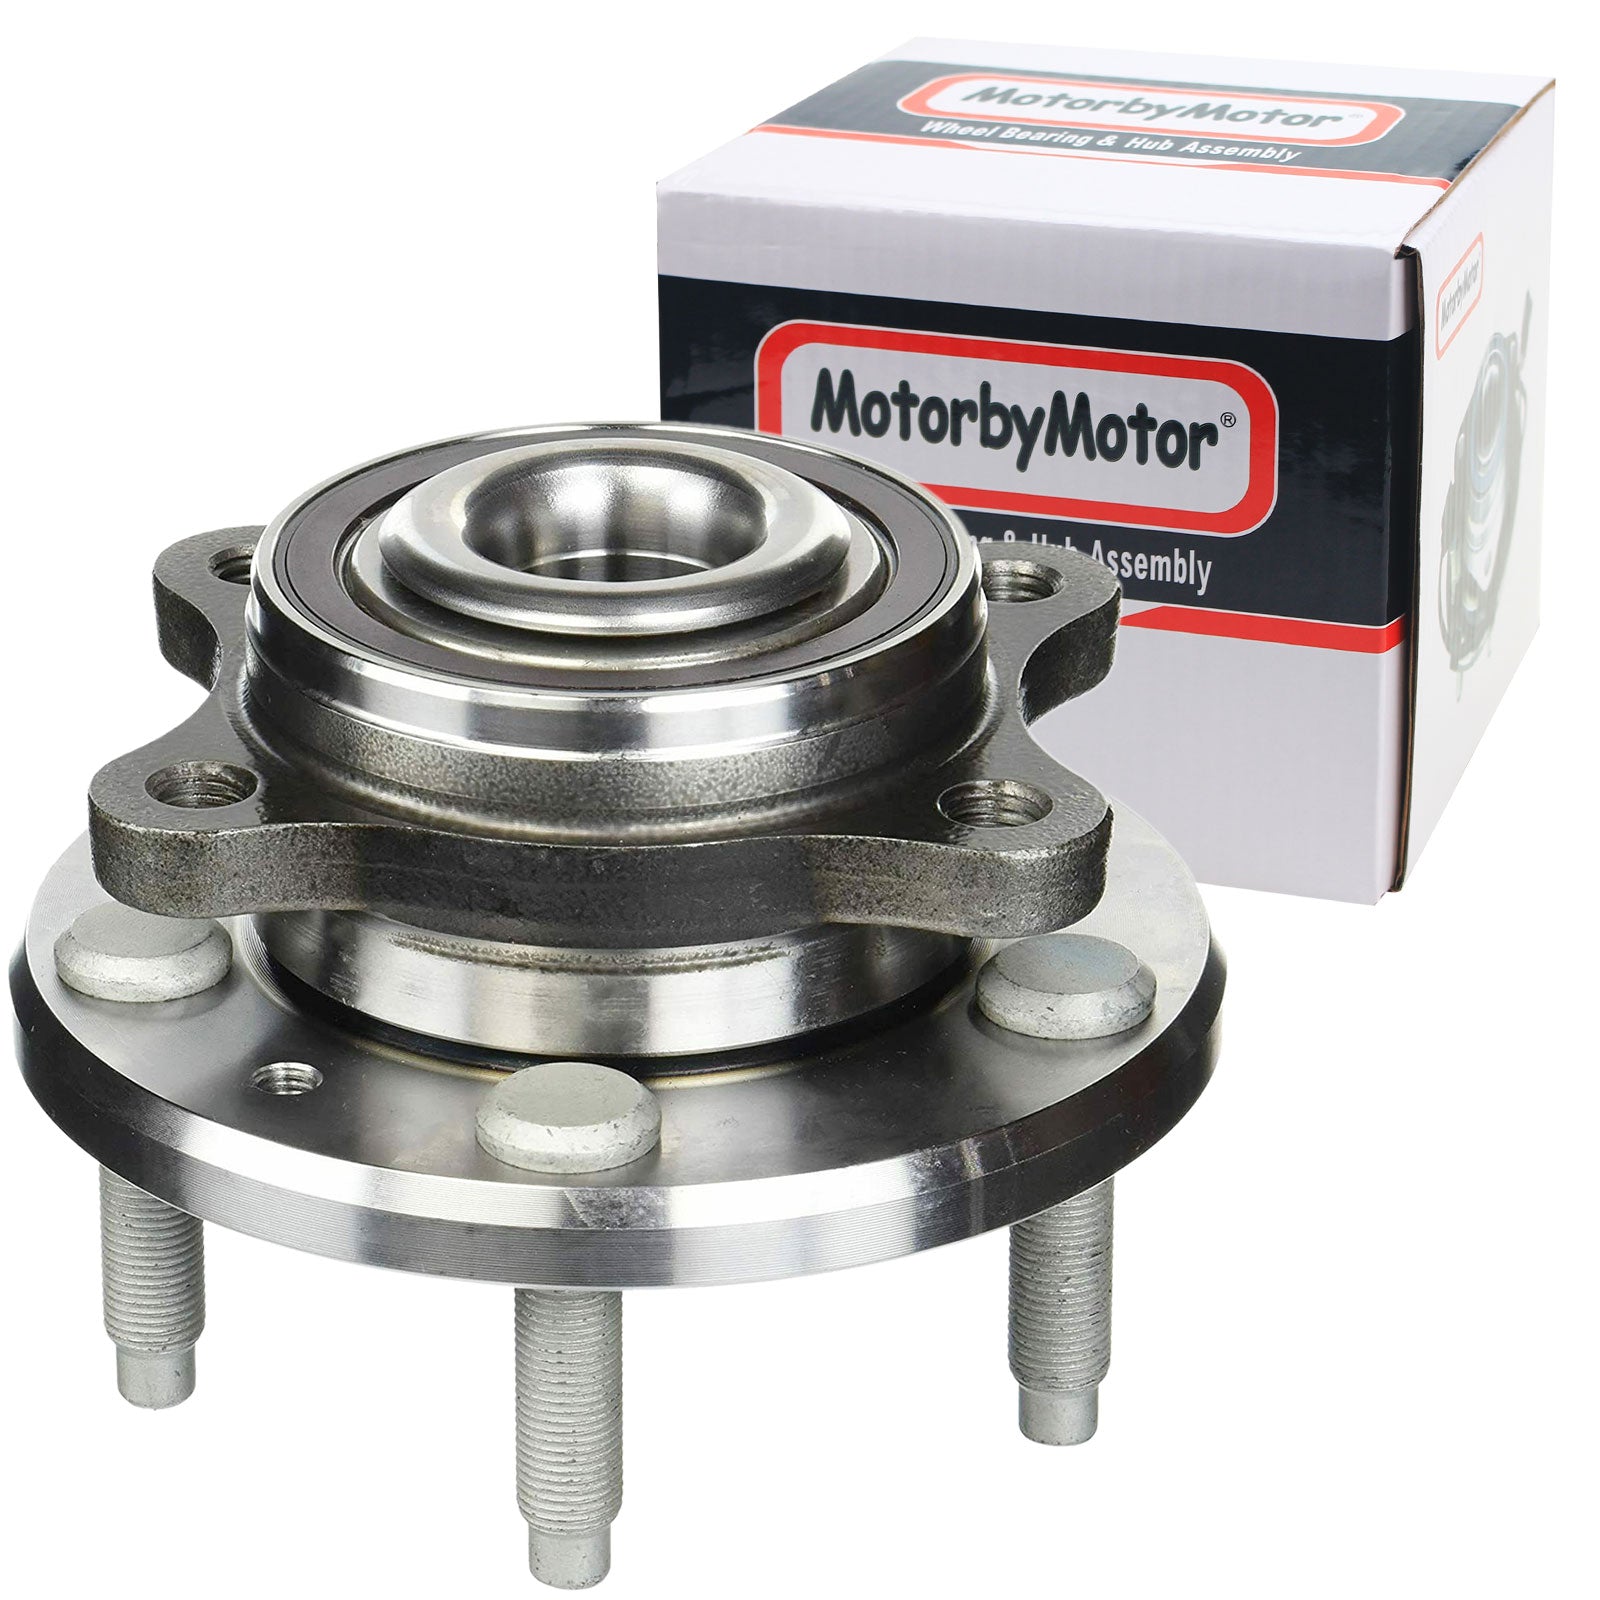 MotorbyMotor 512299 Rear Wheel Bearing and Hub Assembly with 5 Lugs Fits for Ford Five Hundred Freestyle Taurus X, Mercury Montego Sable Low-Runout OE Directly Replacement Hub Bearing (2WD FWD) MotorbyMotor